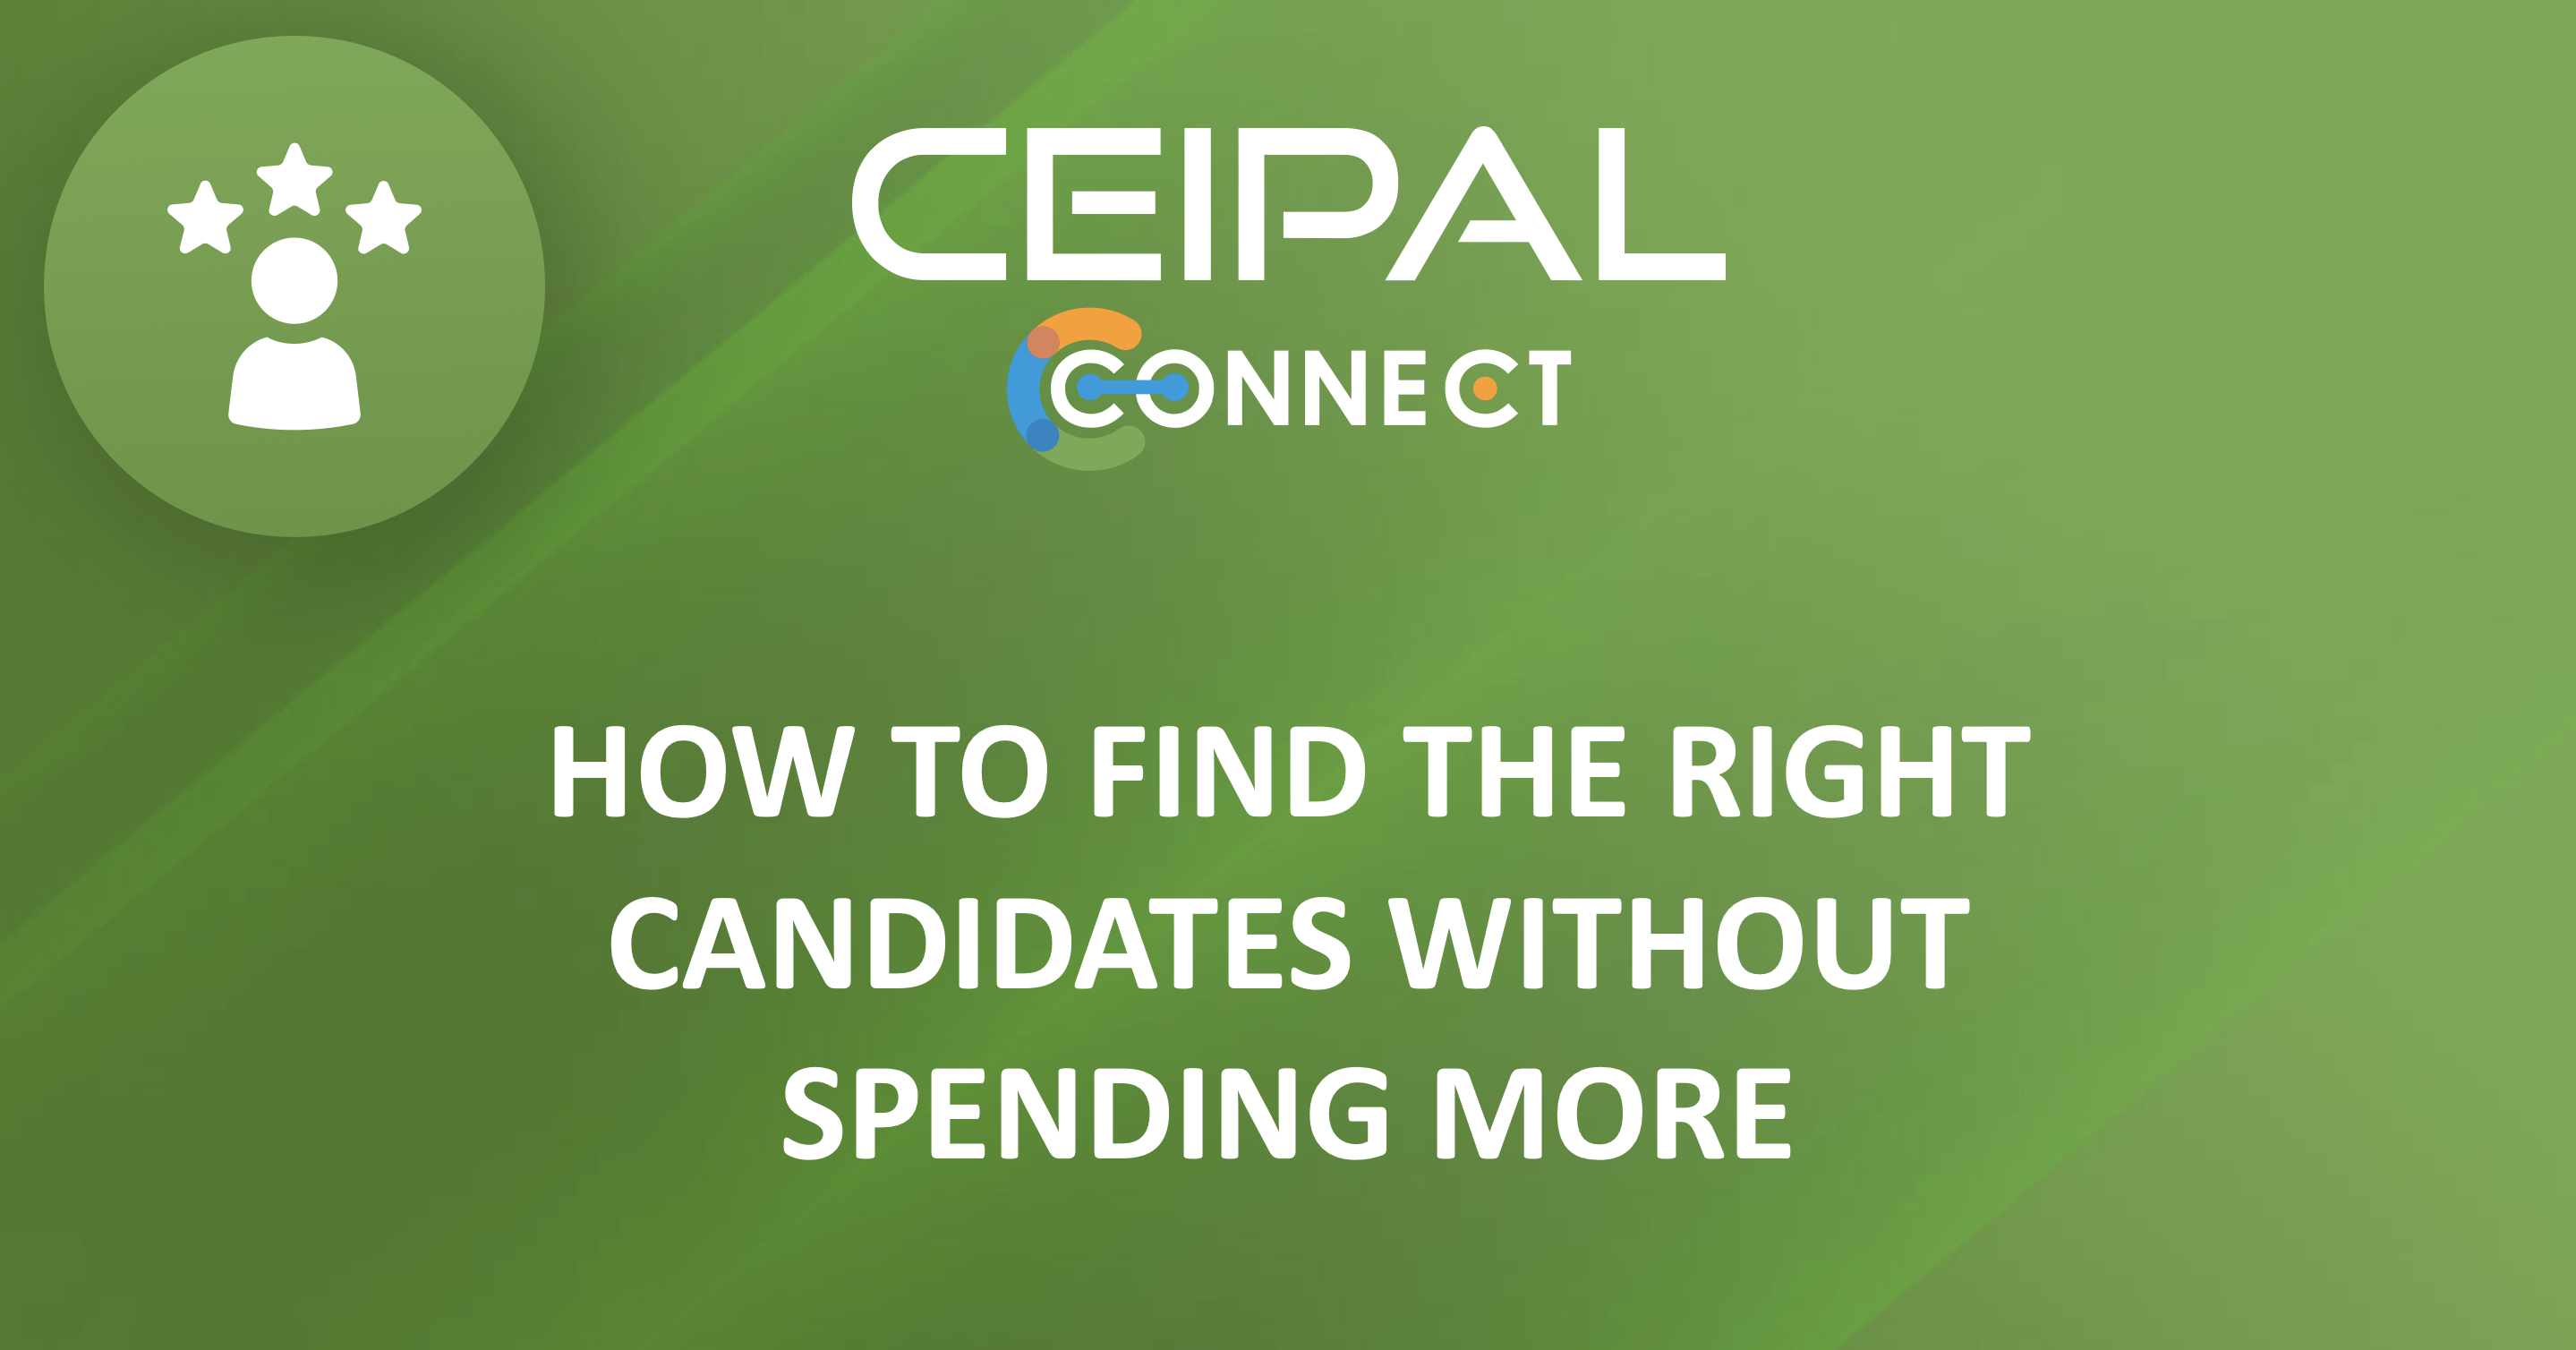 How to Find the Right Candidates Without Spending More